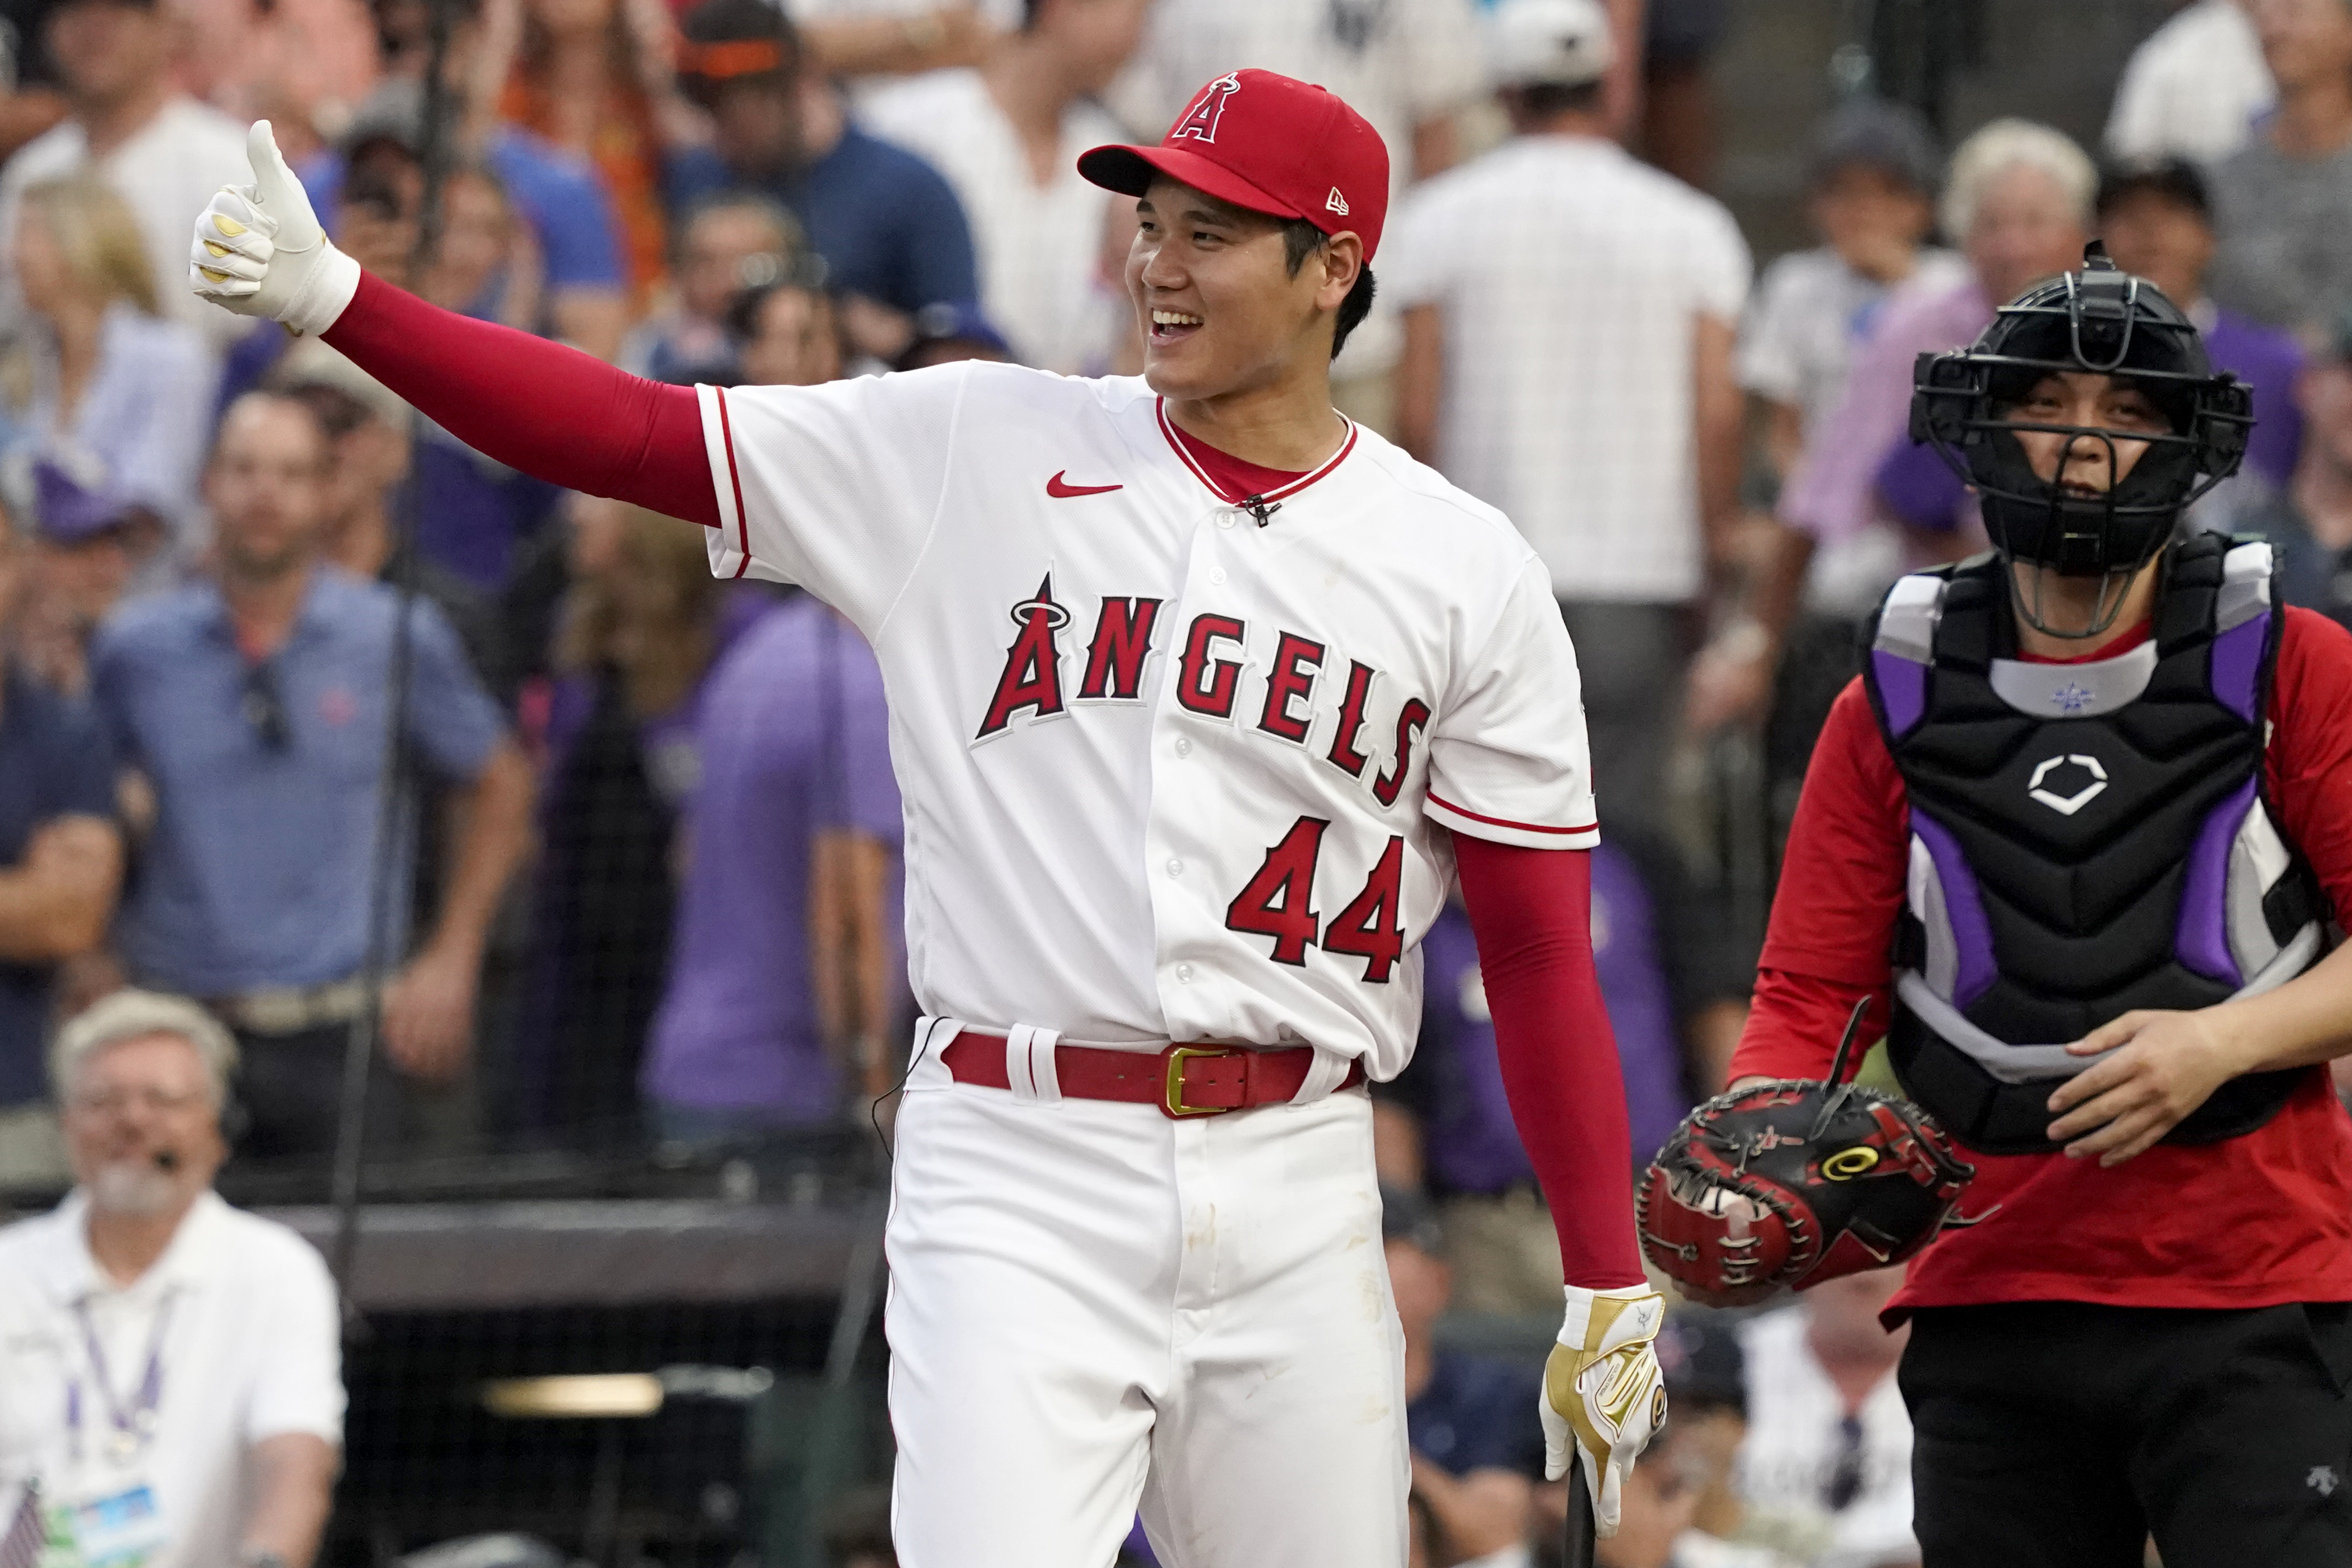 Video: Angels' Mike Trout Calls Shohei Ohtani During 2021 MLB Home